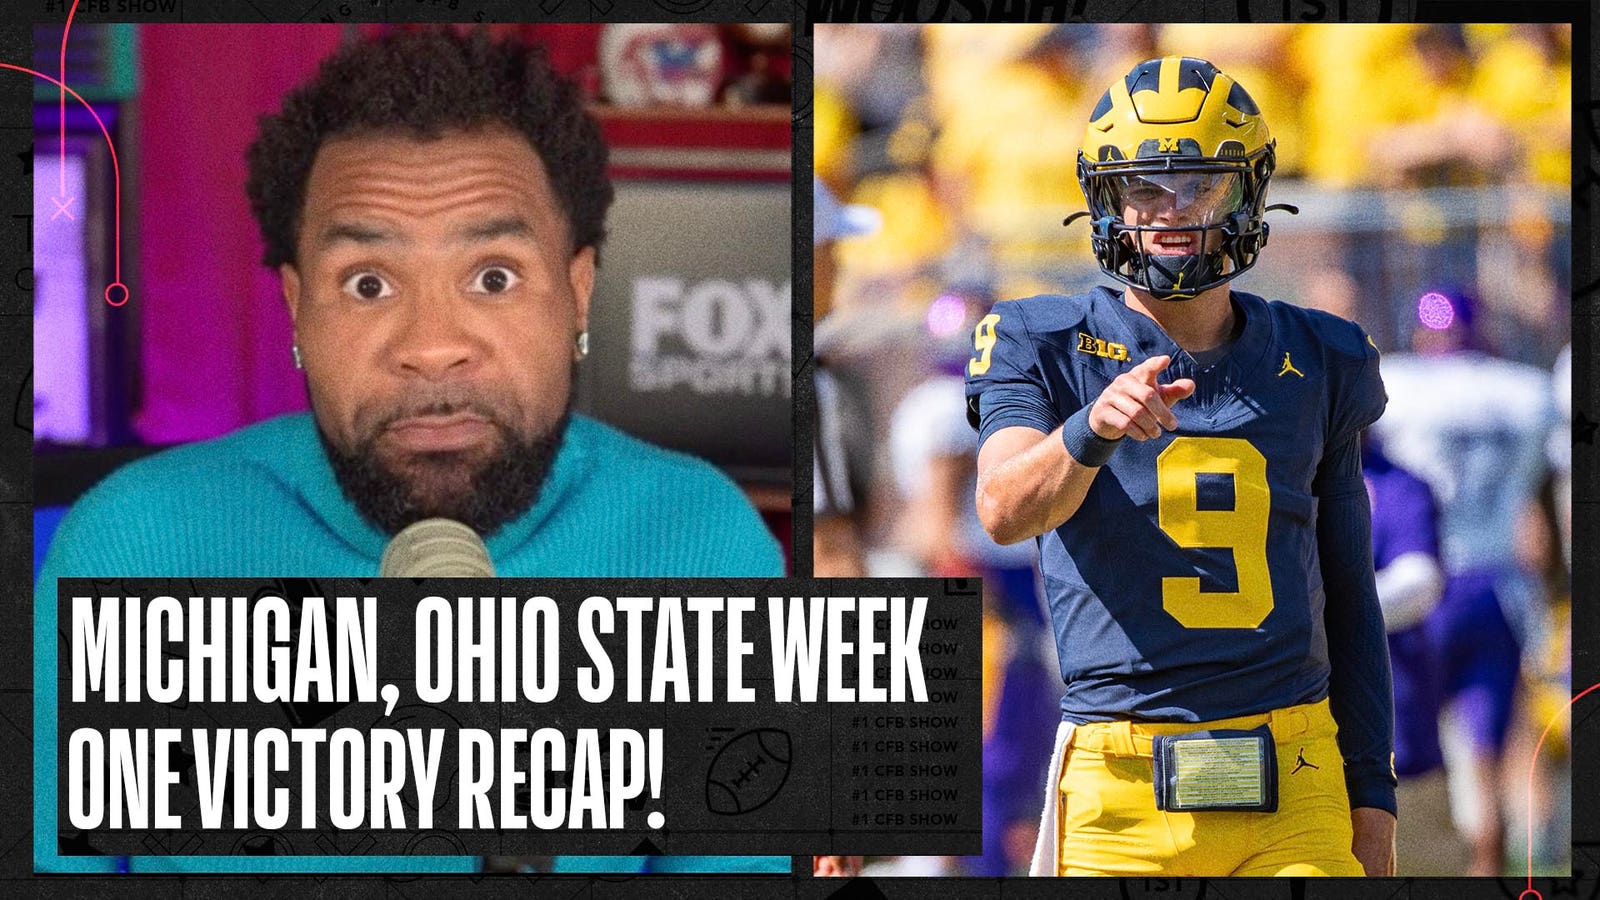 RJ Young breaks down Michigan, Ohio State's Week 1 victory